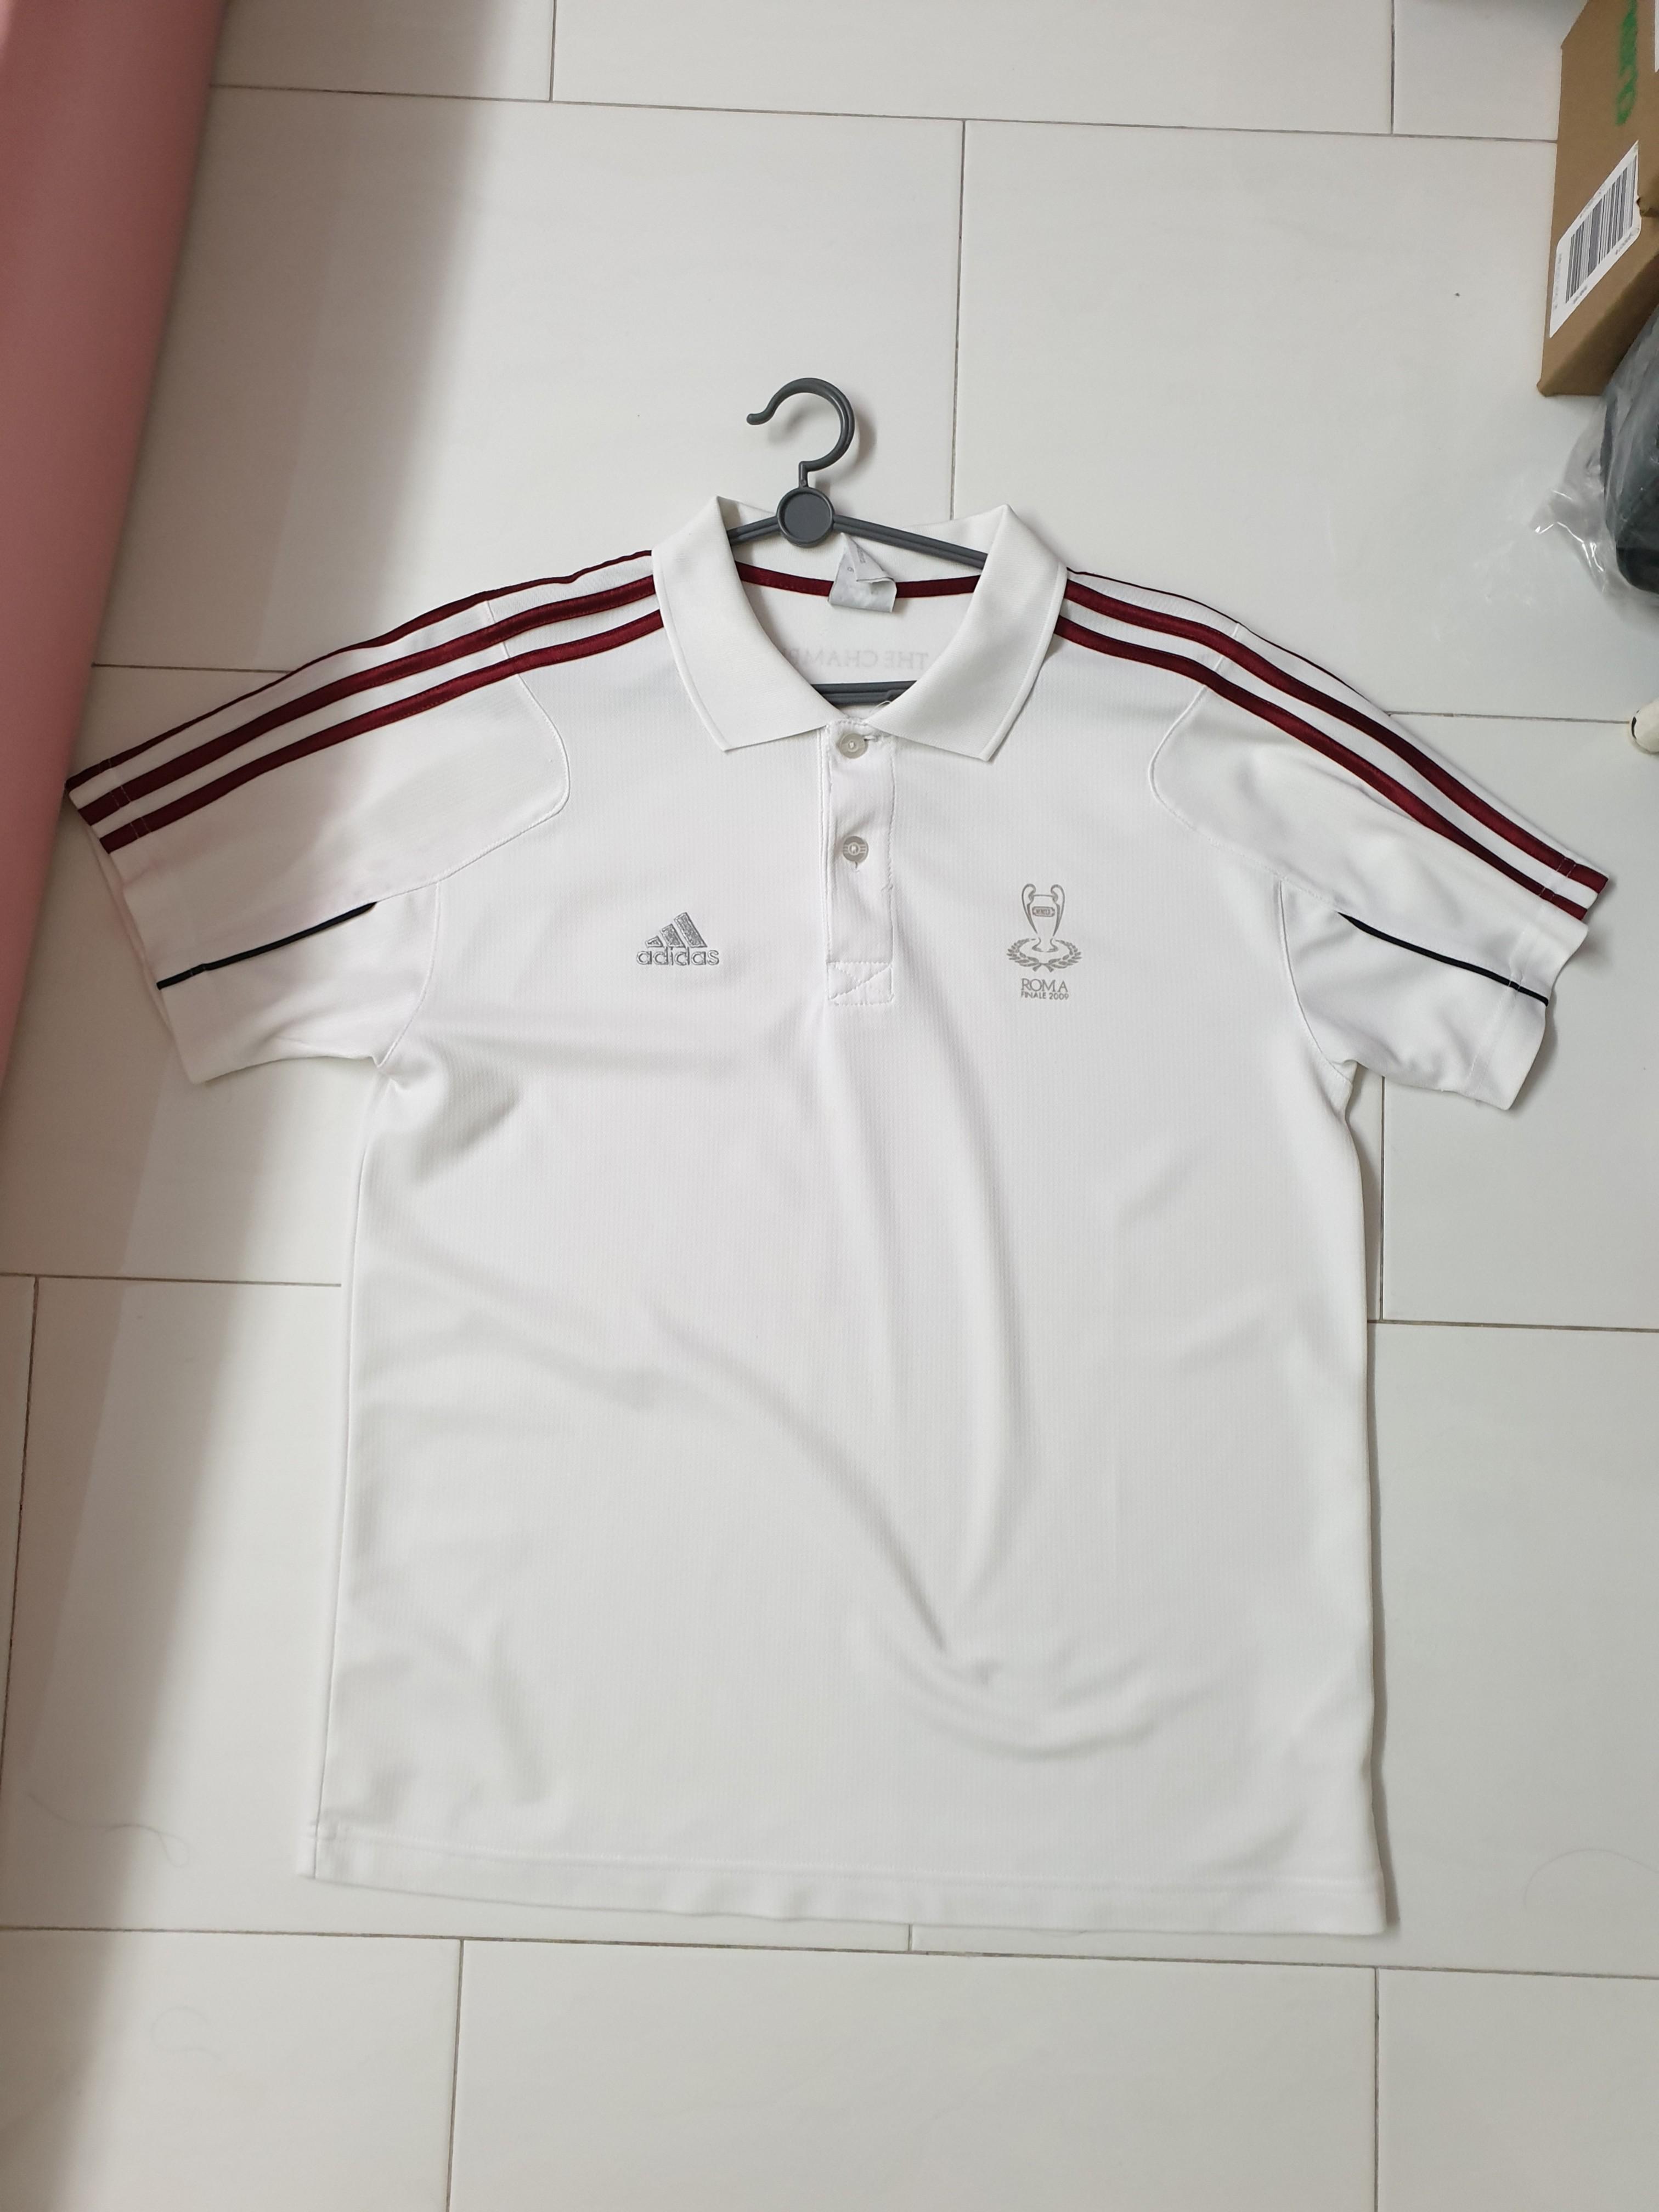 Adidas white collar T shirt with maroon 